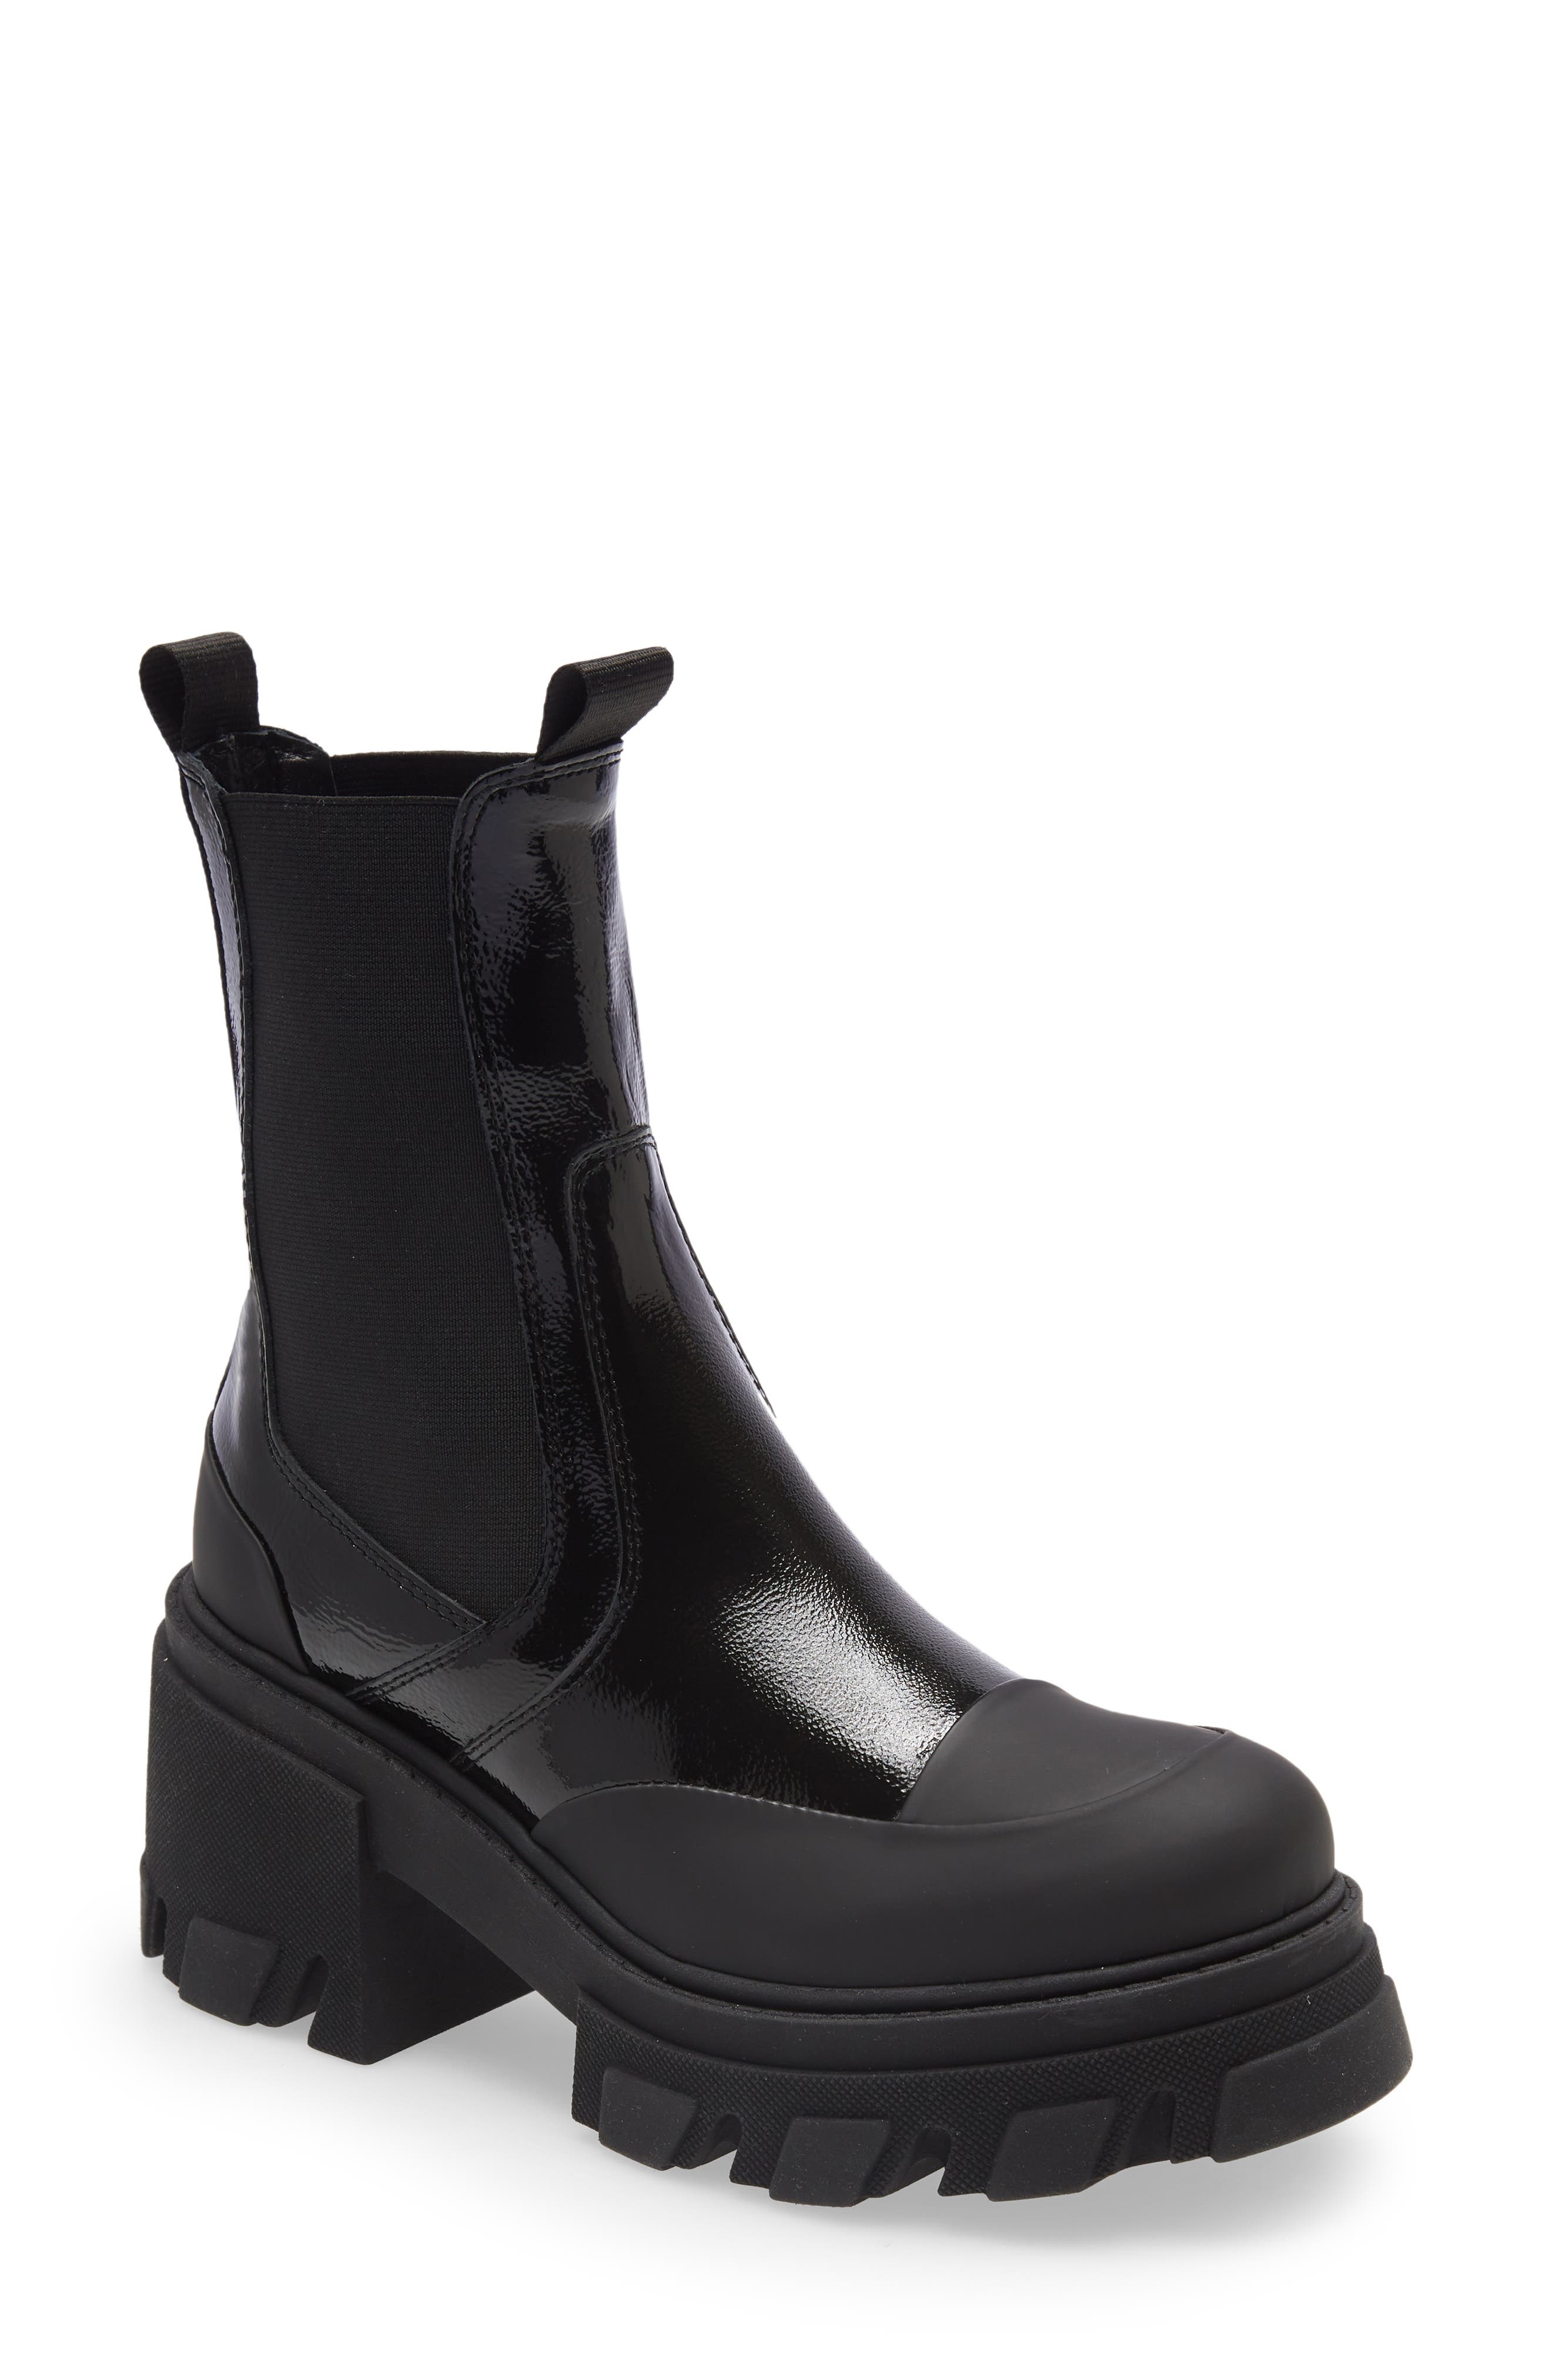 Ganni Mid Chelsea Boot in Black at Nordstrom